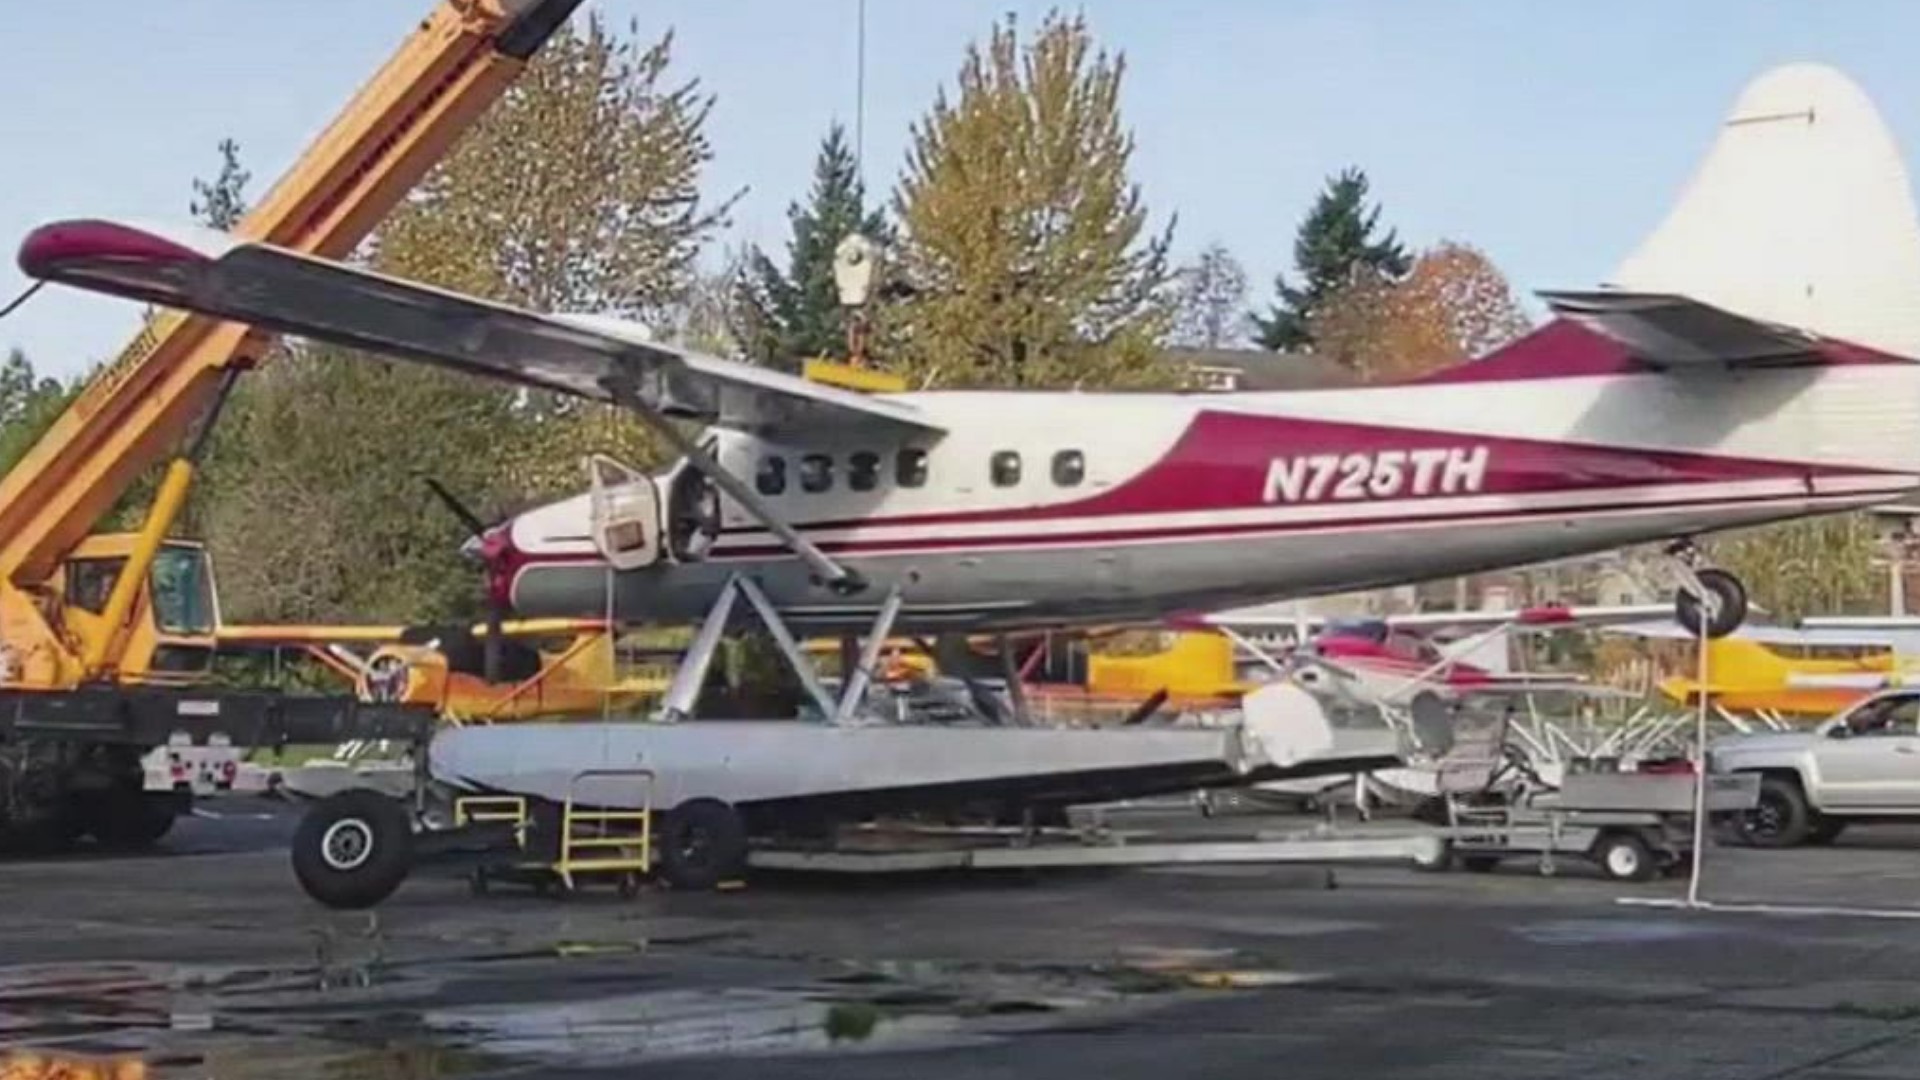 The de Havilland DHC-3 Otter floatplane that crashed near Whidbey Island, killing at least one person, was built in 1967.